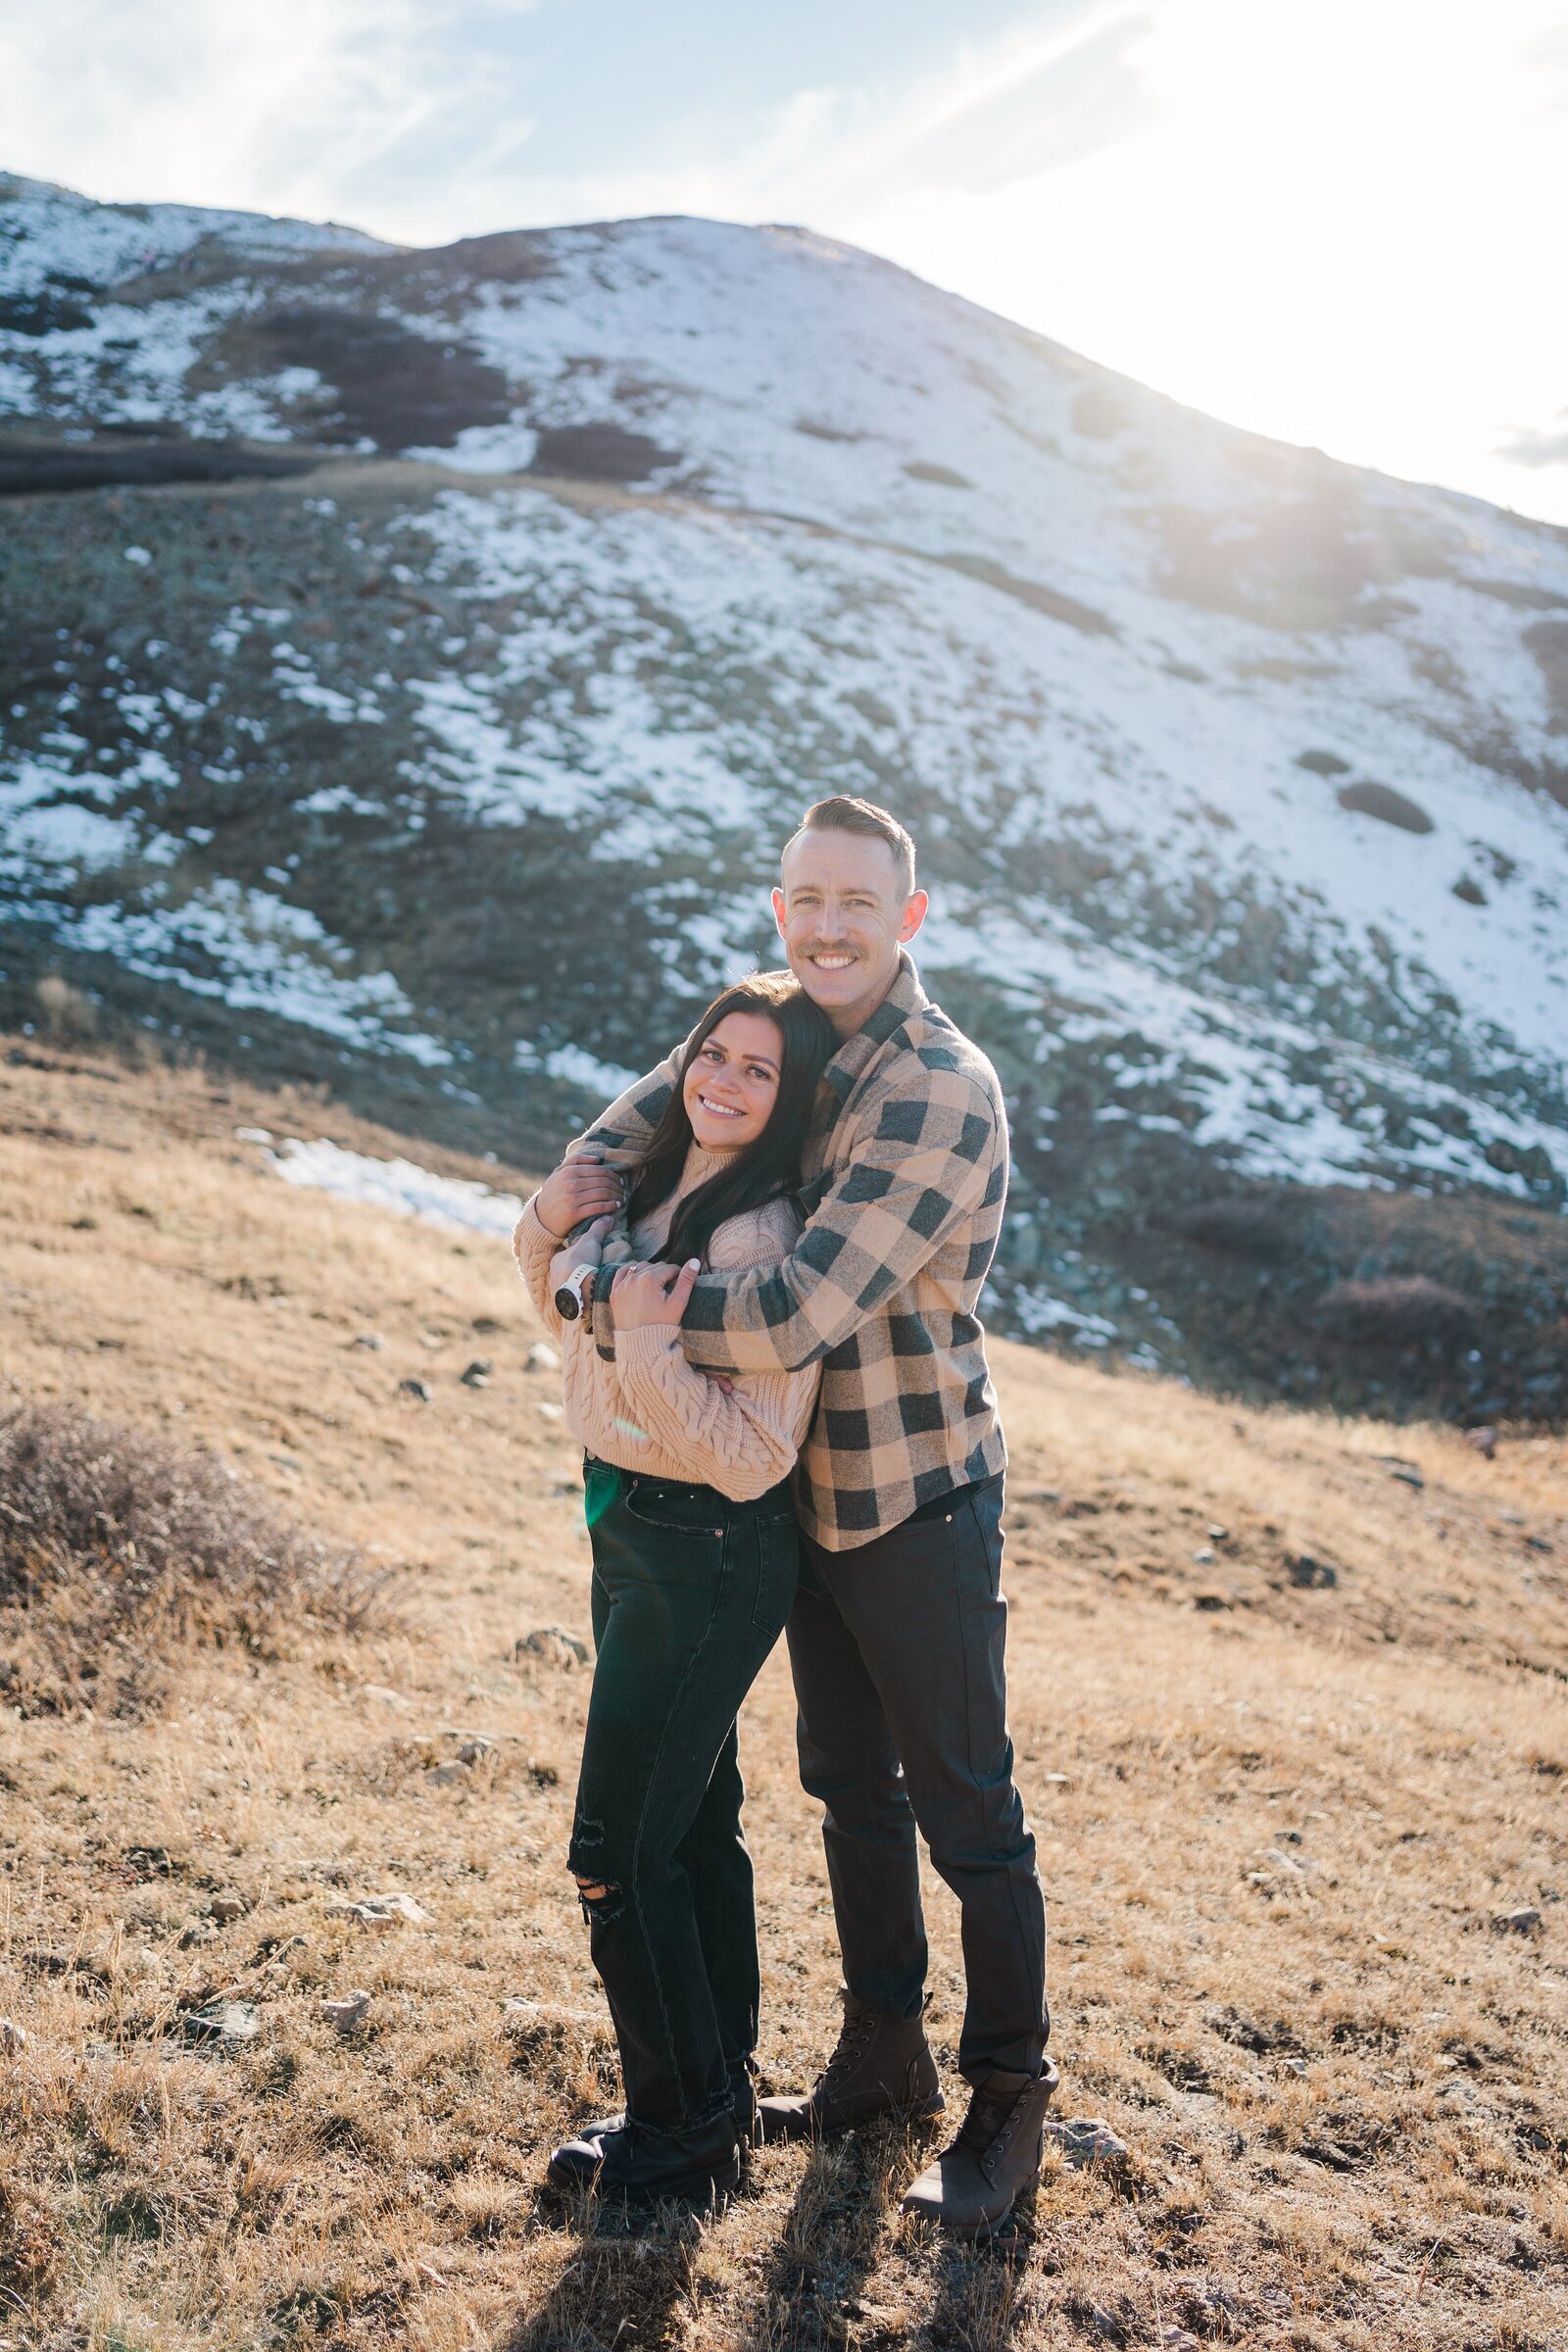 This candid photo of a Colorado couple perfectly captures the love and connection between them in the great outdoors.